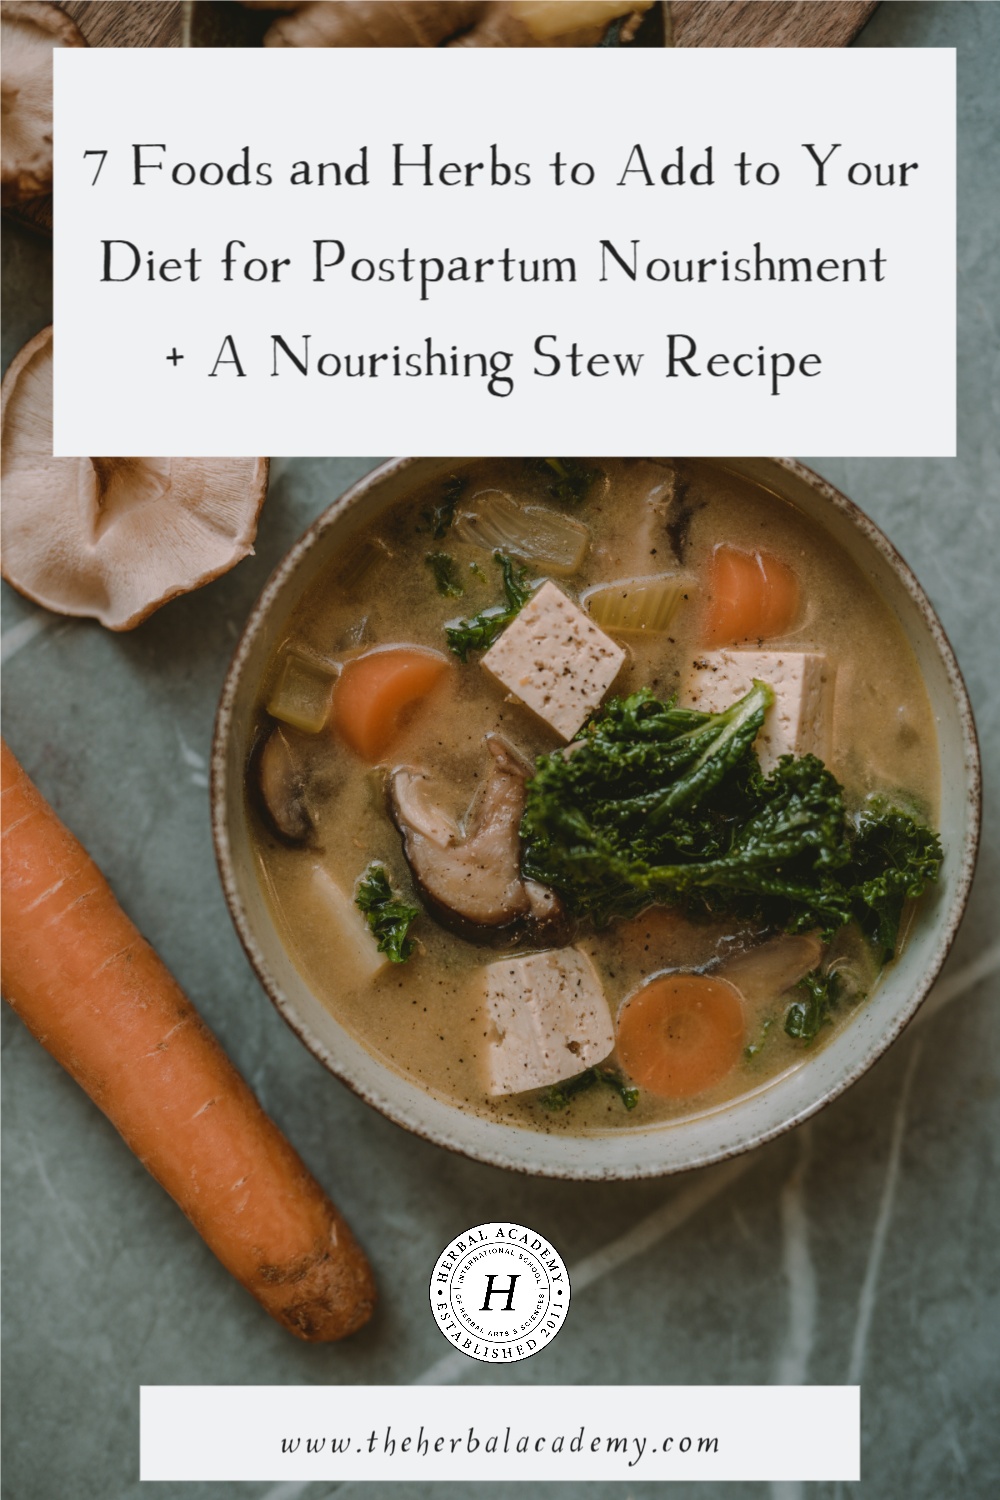 7 Foods and Herbs to Add to Your Diet for Postpartum Nourishment + A Nourishing Stew Recipe | Herbal Academy | Make rest and postpartum nourishment a priority starting with this delicious and healthy Postpartum Nourishment Stew recipe.